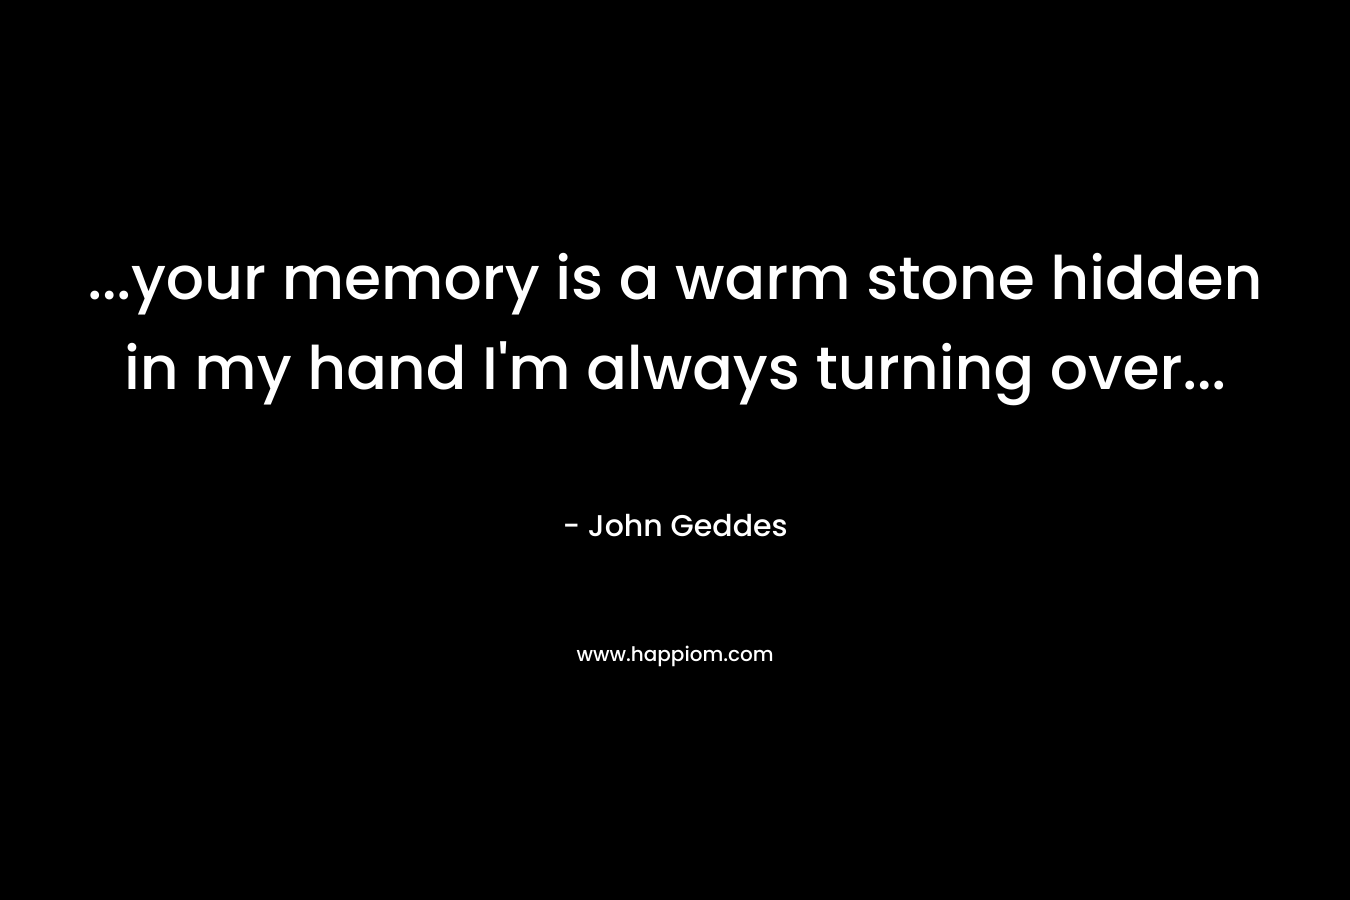 ...your memory is a warm stone hidden in my hand I'm always turning over...